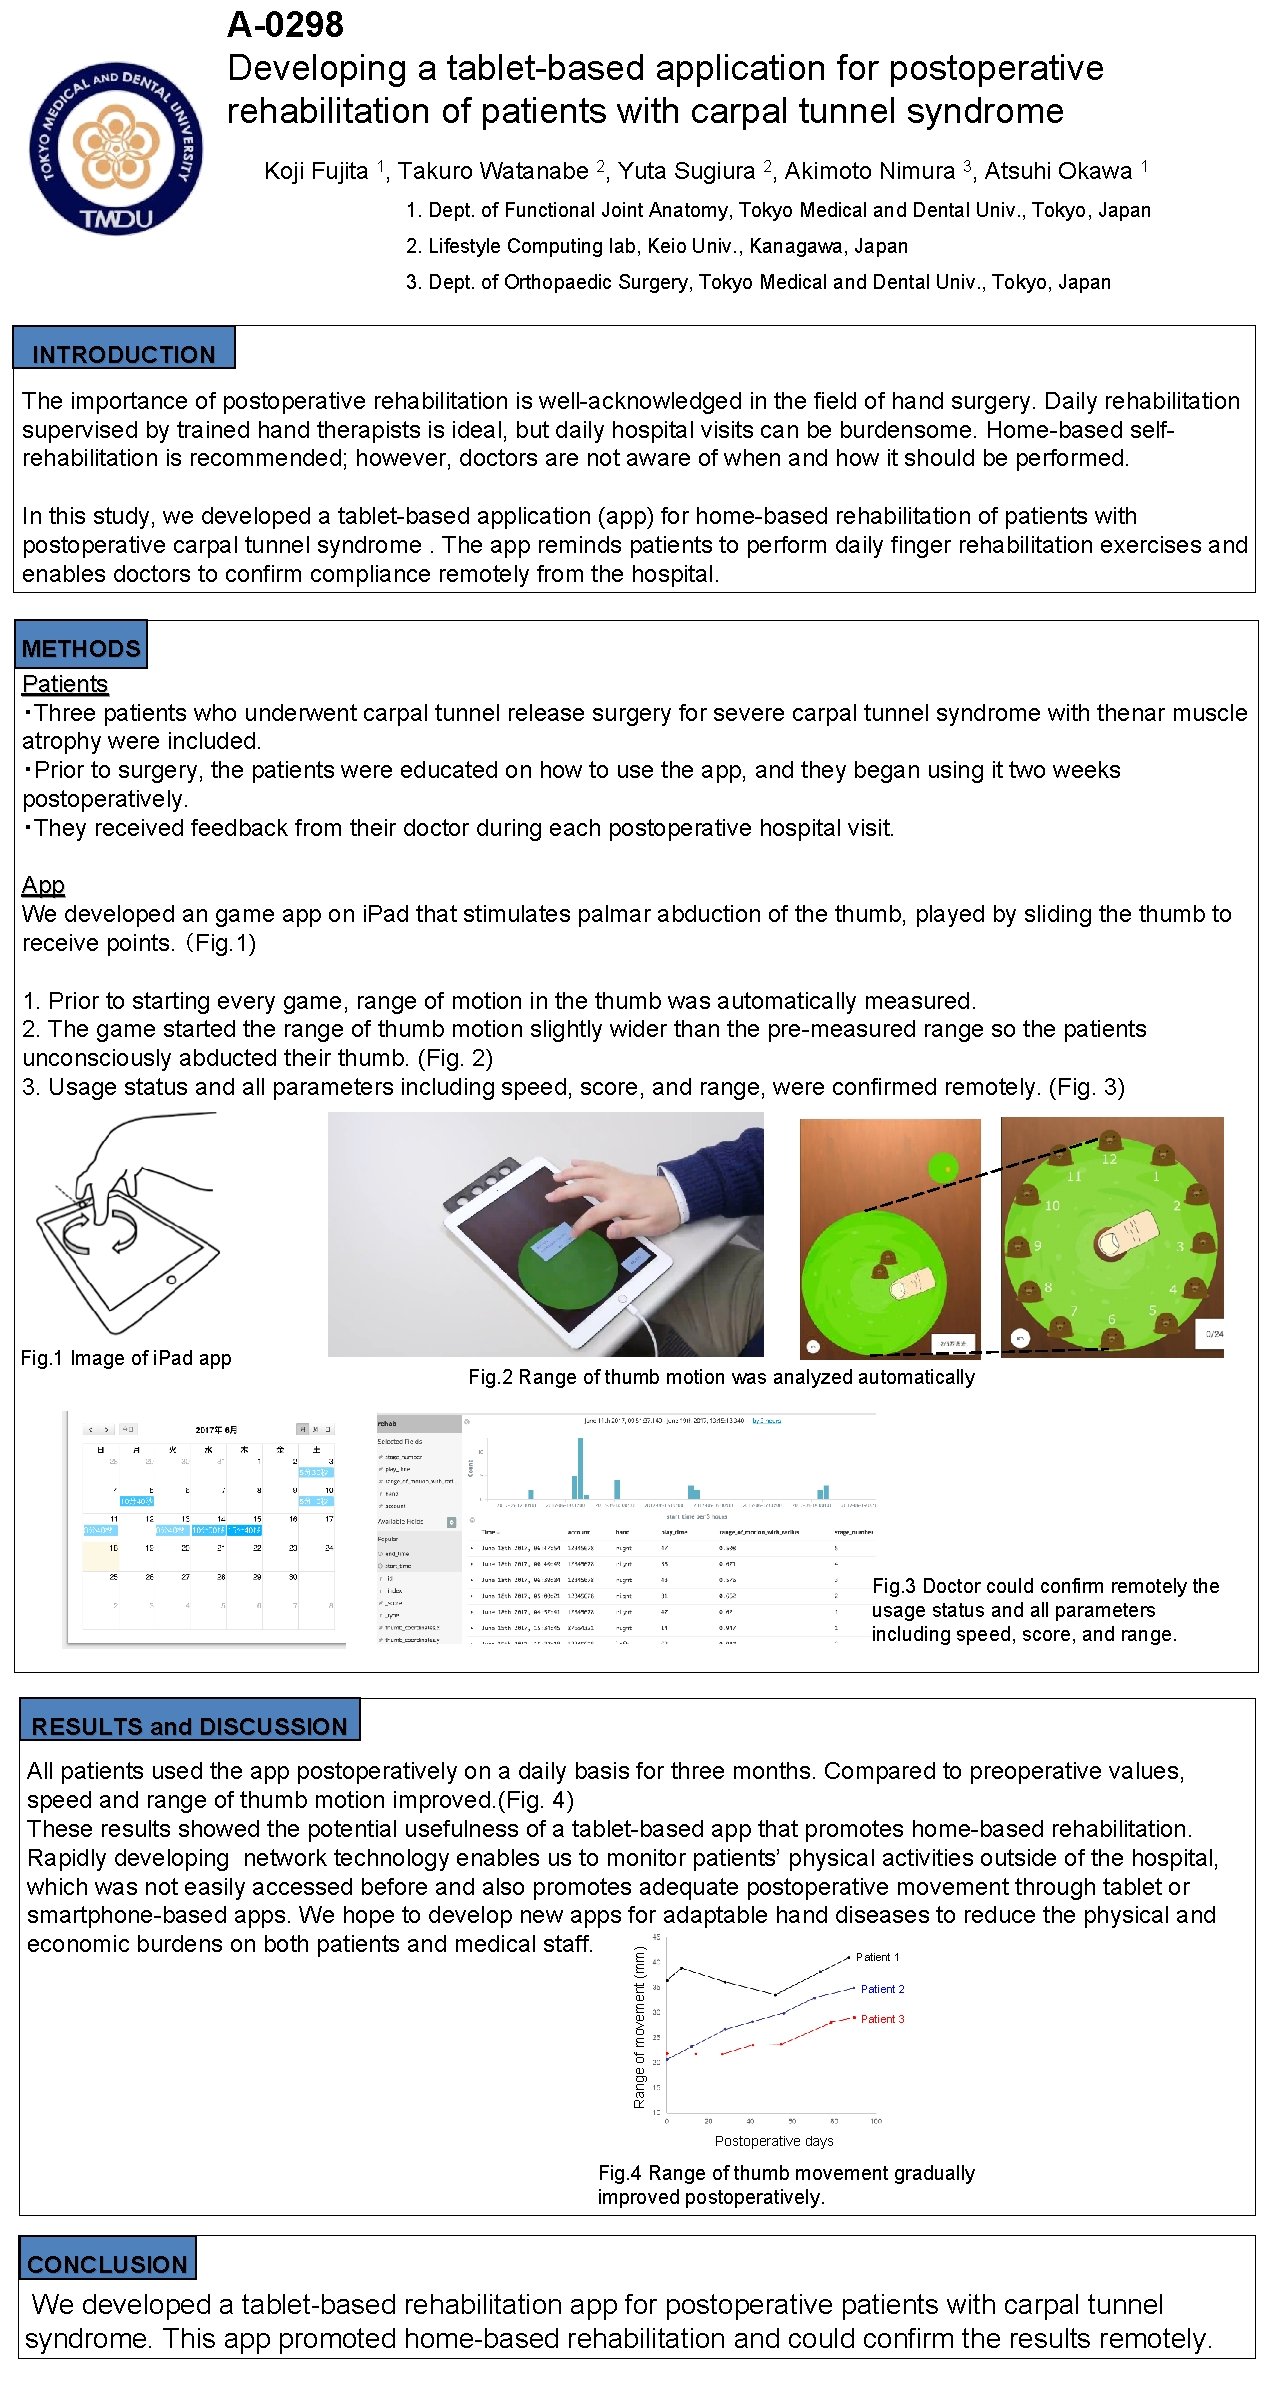 A-0298 Developing a tablet-based application for postoperative rehabilitation of patients with carpal tunnel syndrome